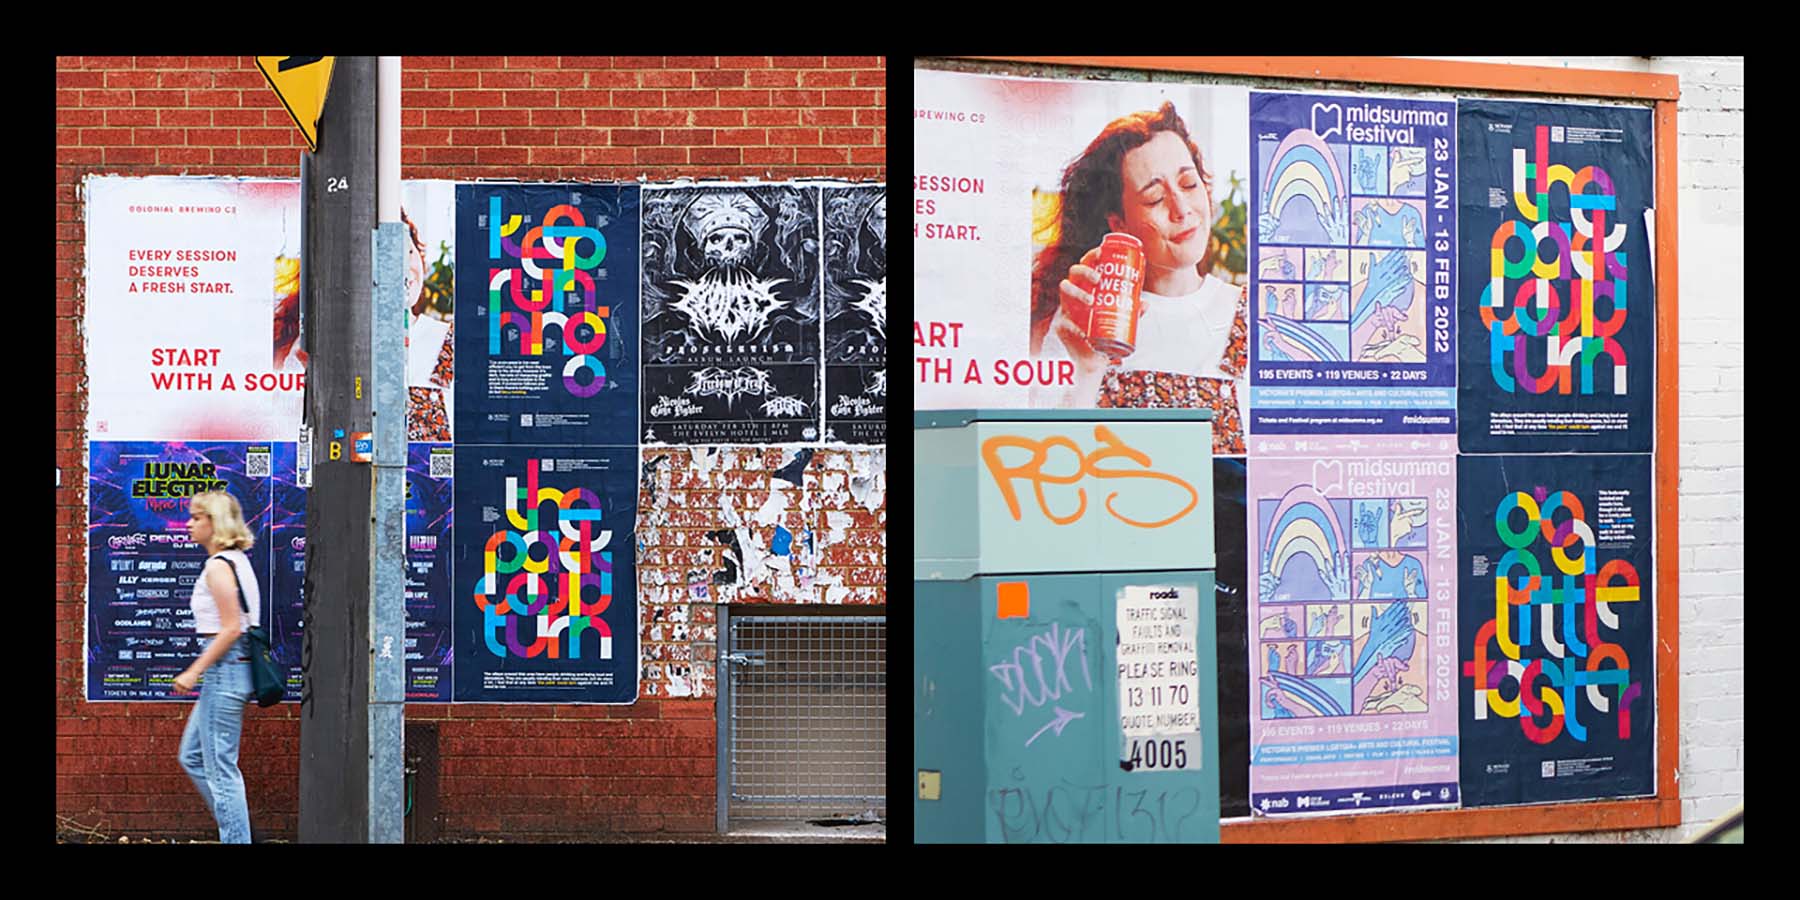 The series of posters in their urban location and close up of the narrative text